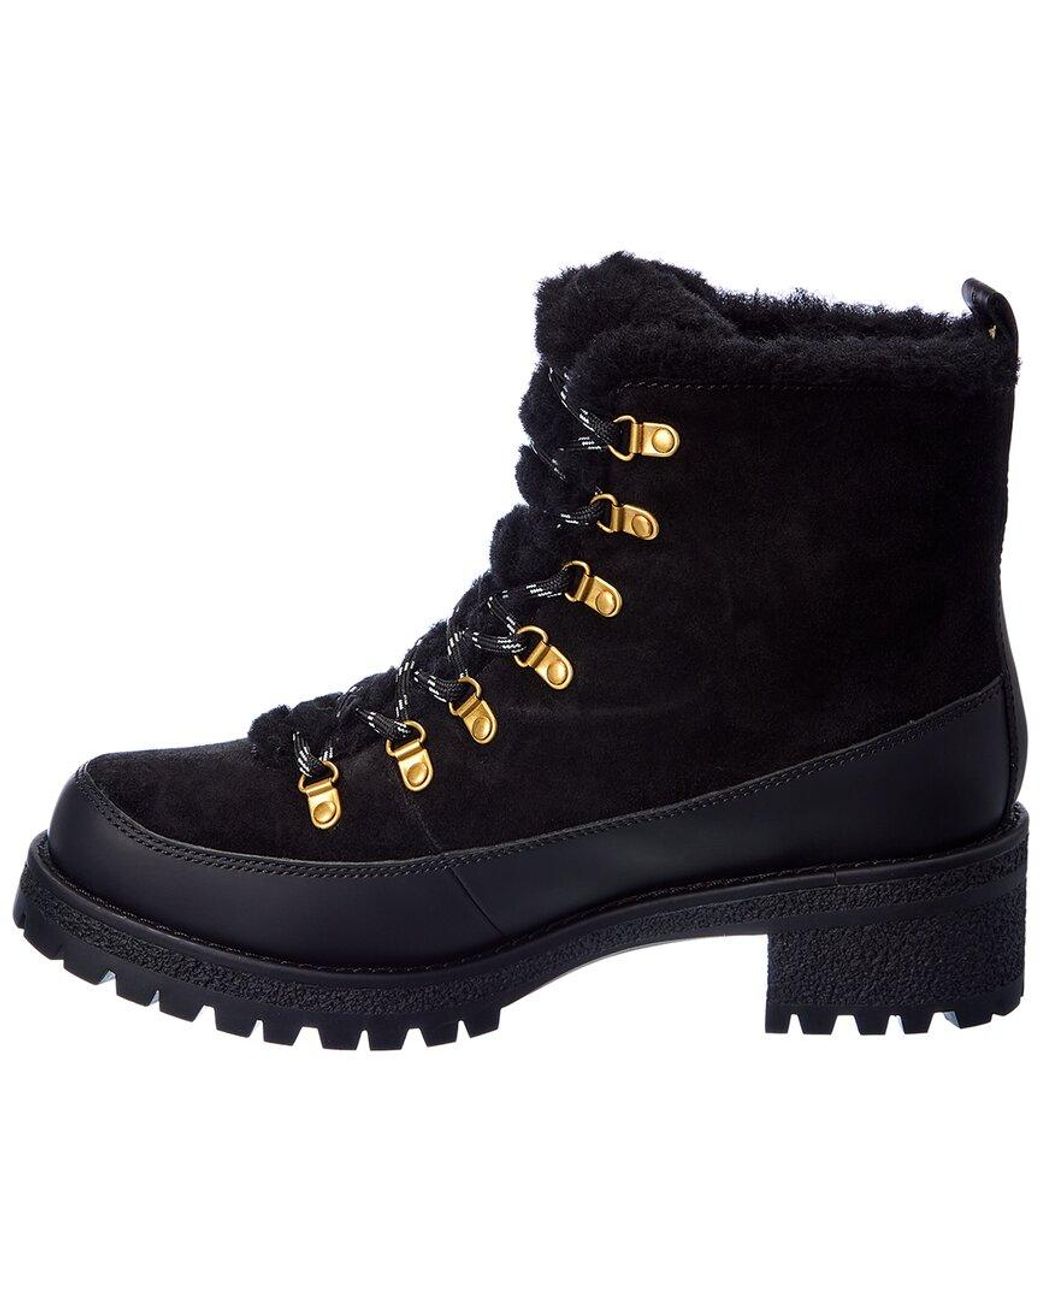 Tory Burch Thea Suede & Shearling Boot in Black | Lyst